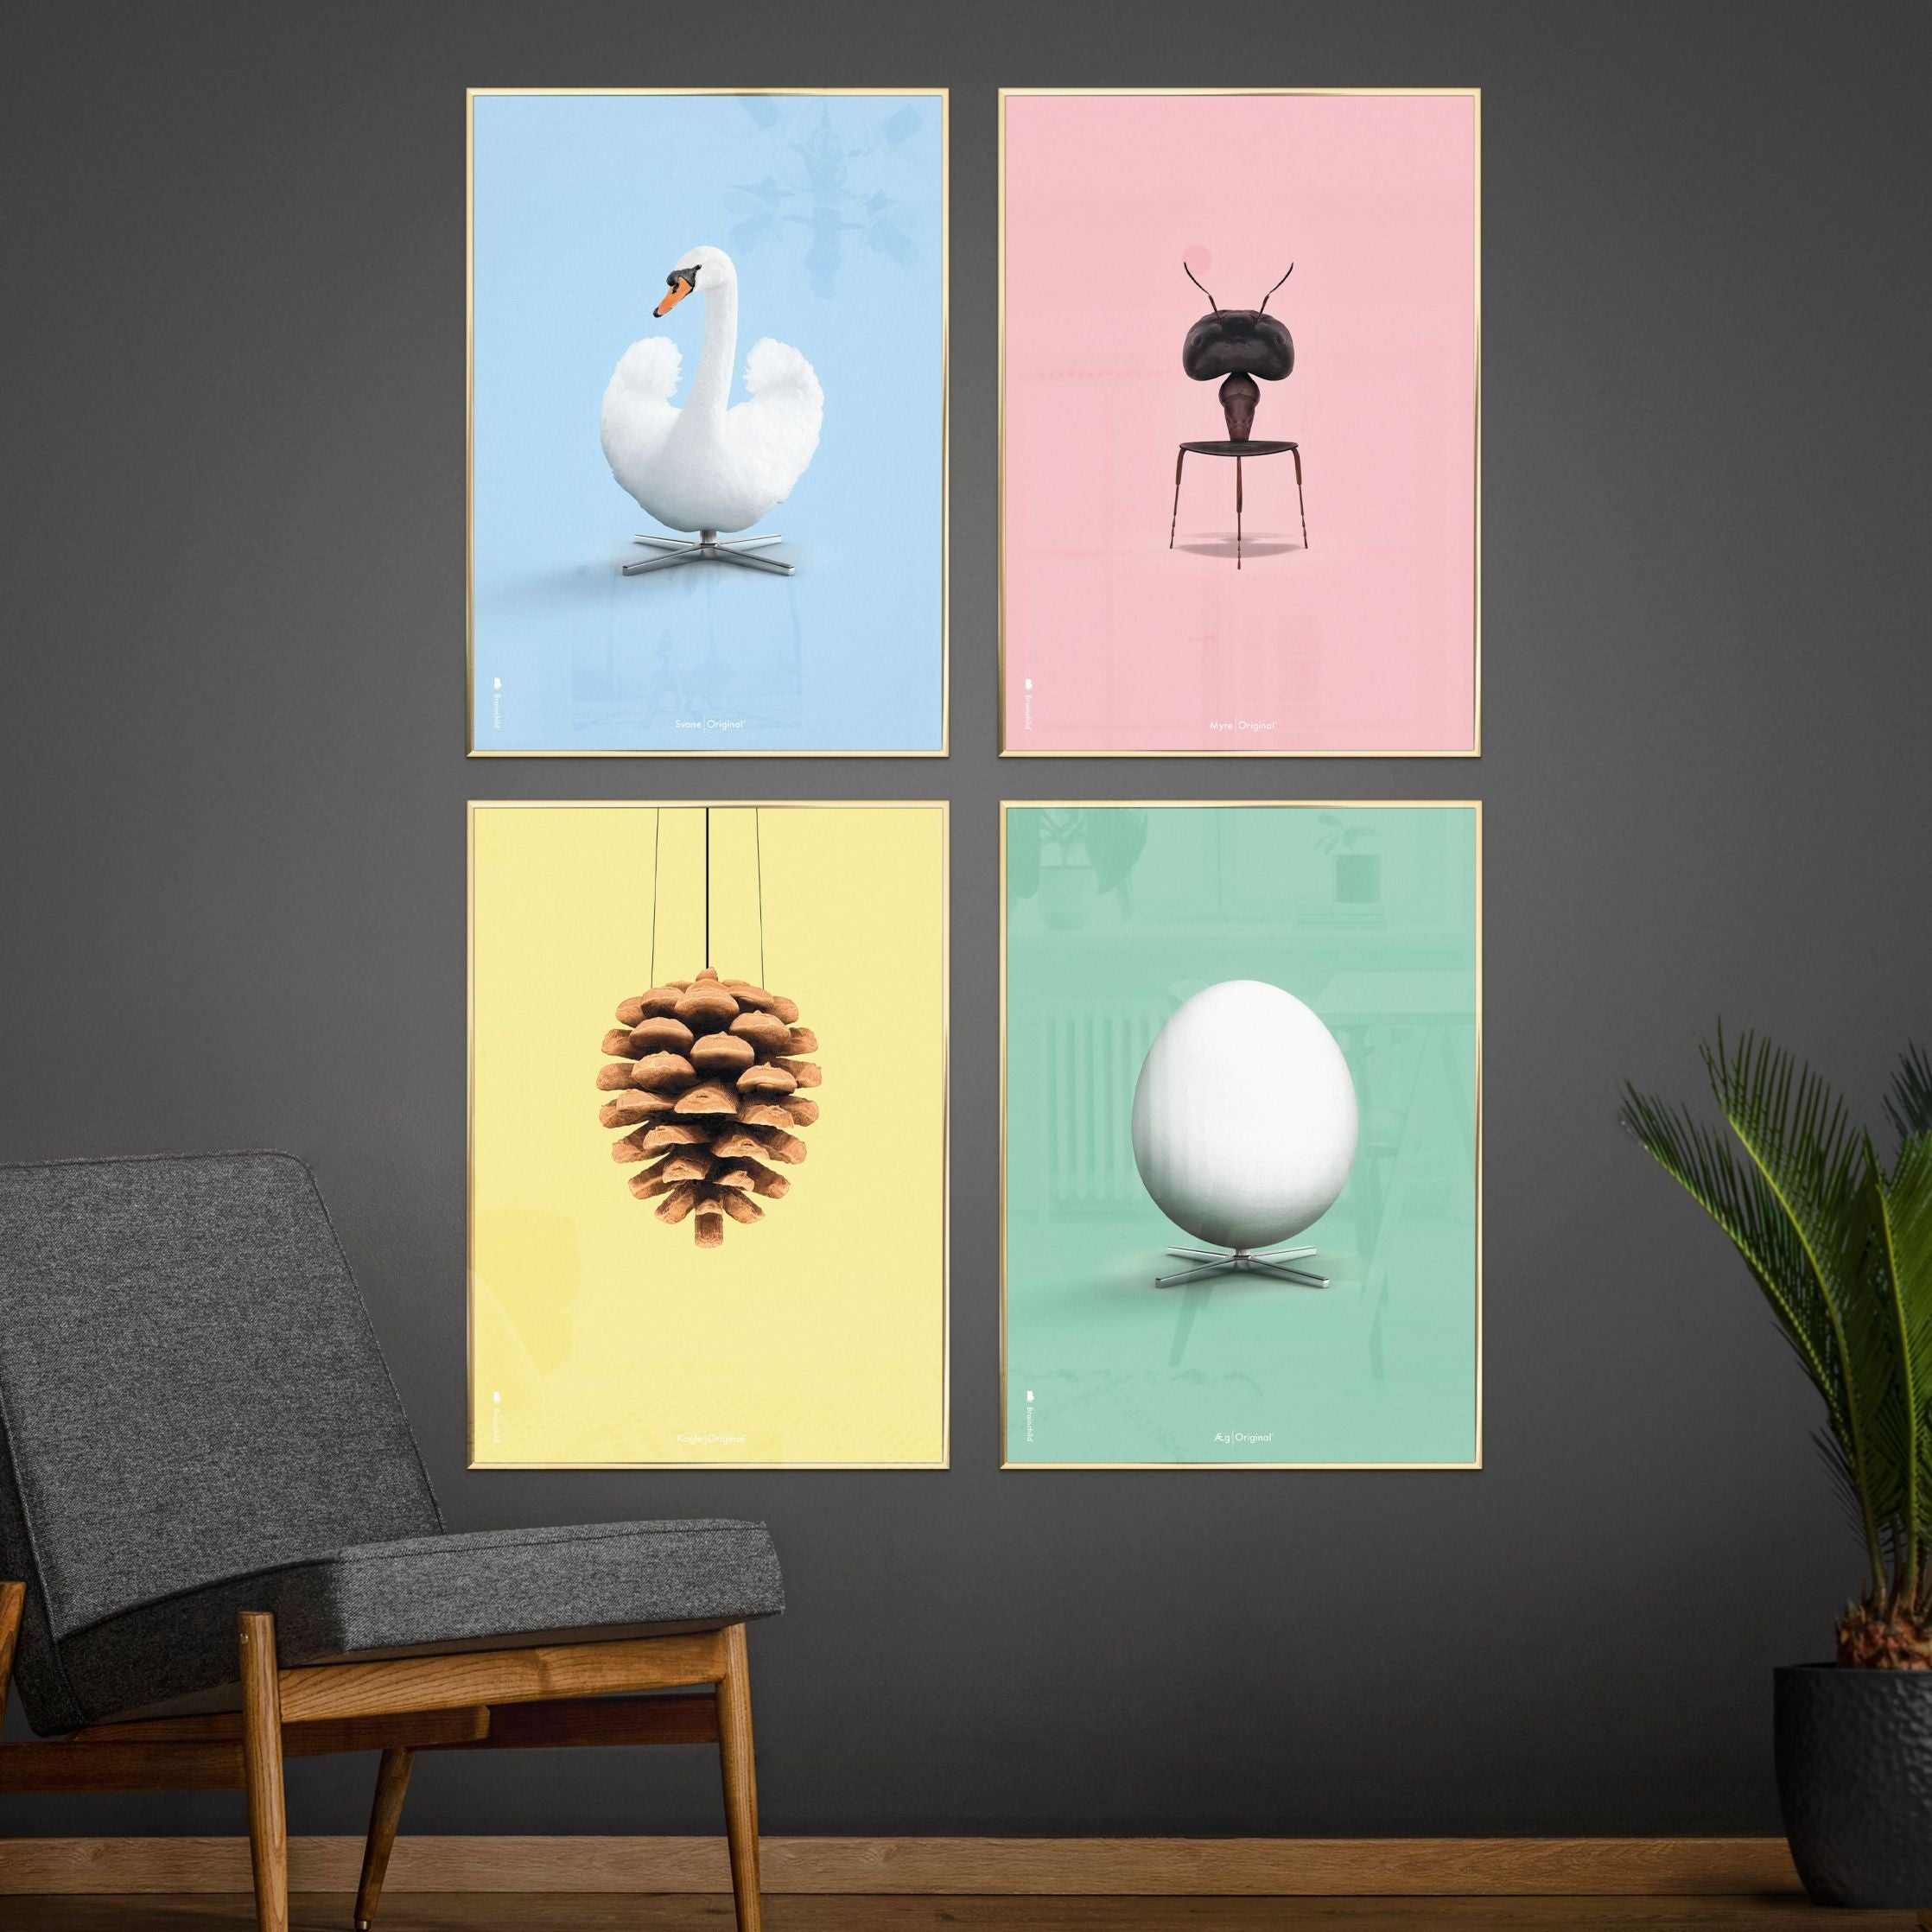 Brainchild Pine Cone Classic Poster, Brass Colored Frame 70 X100 Cm, Yellow Background